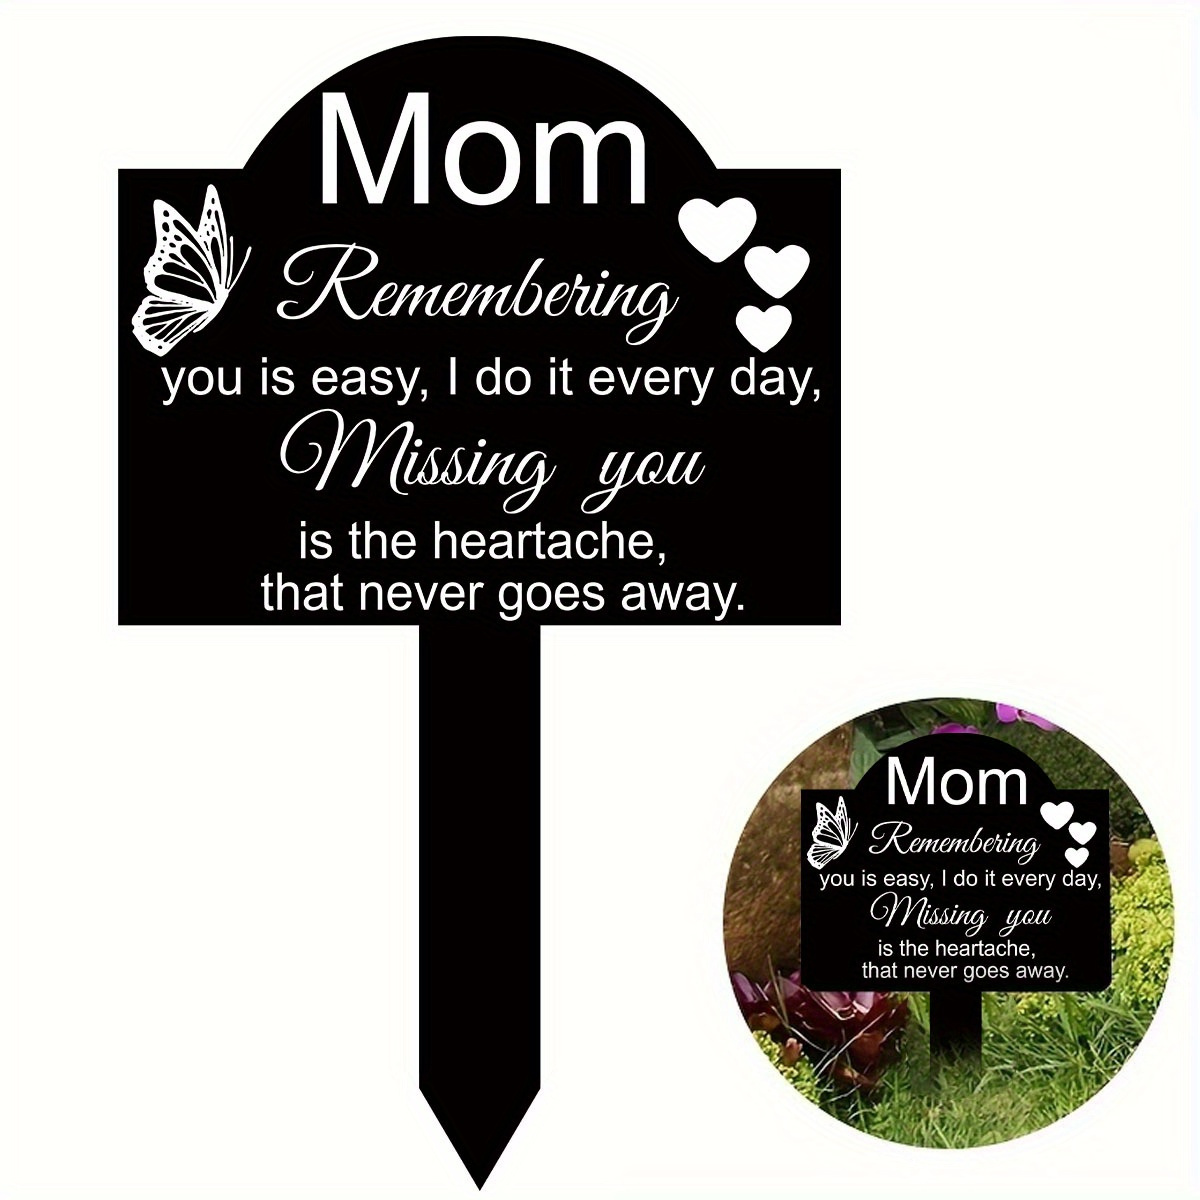 

1pc Rustic Acrylic Memorial Garden Stake, Memorial Tribute, "mom Remembering You" Grave Marker, Sympathy Outdoor Yard Decor, Waterproof Cemetery Decoration With Rose Design